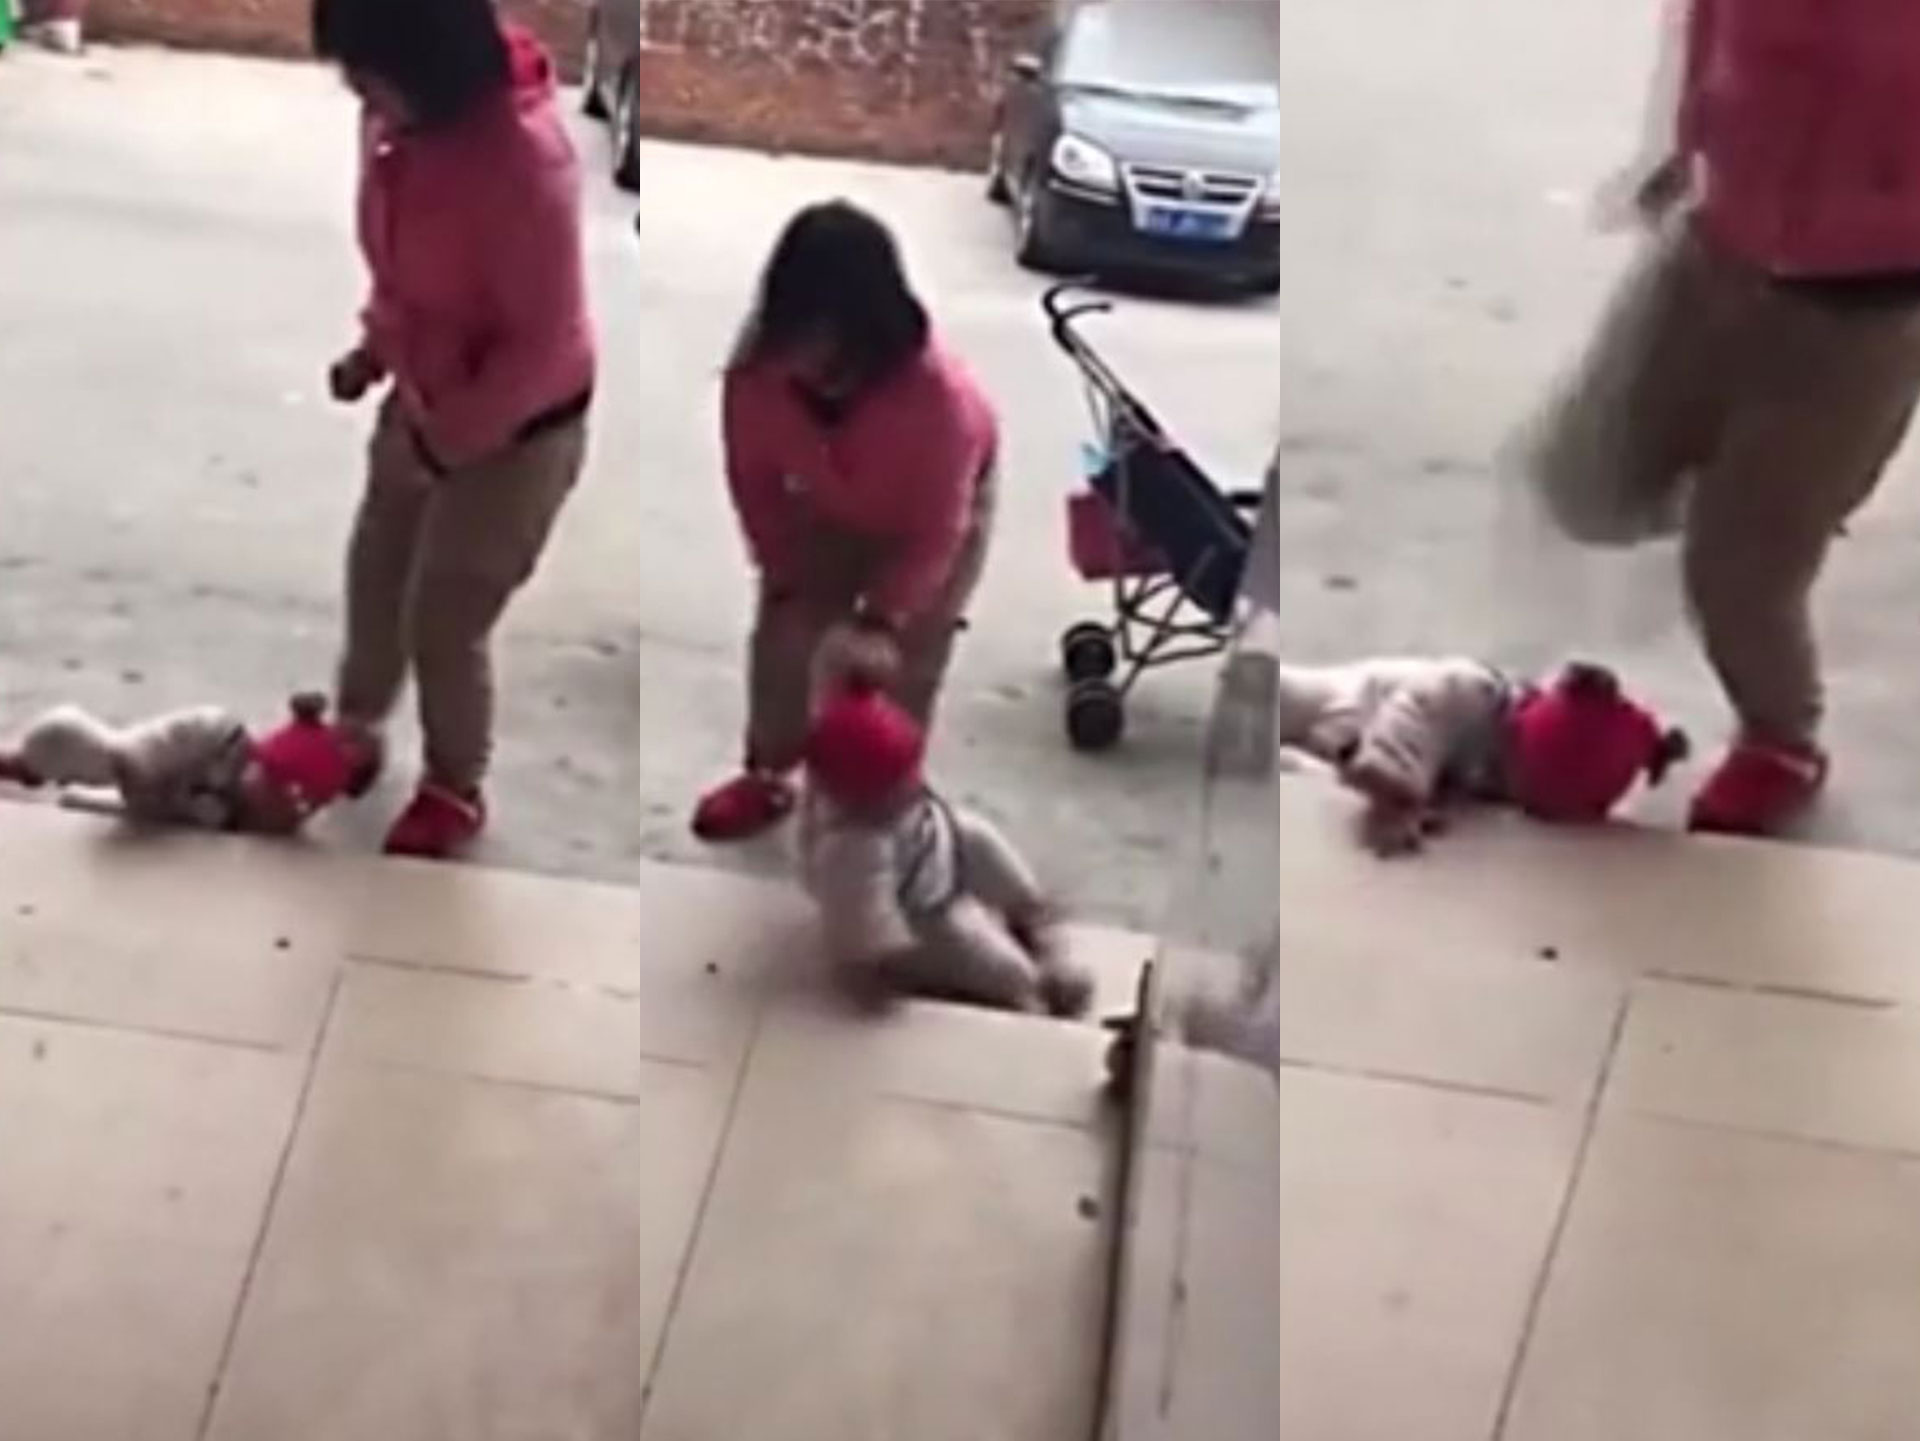 Horrific footage emerges of woman abusing and kicking her toddler girl